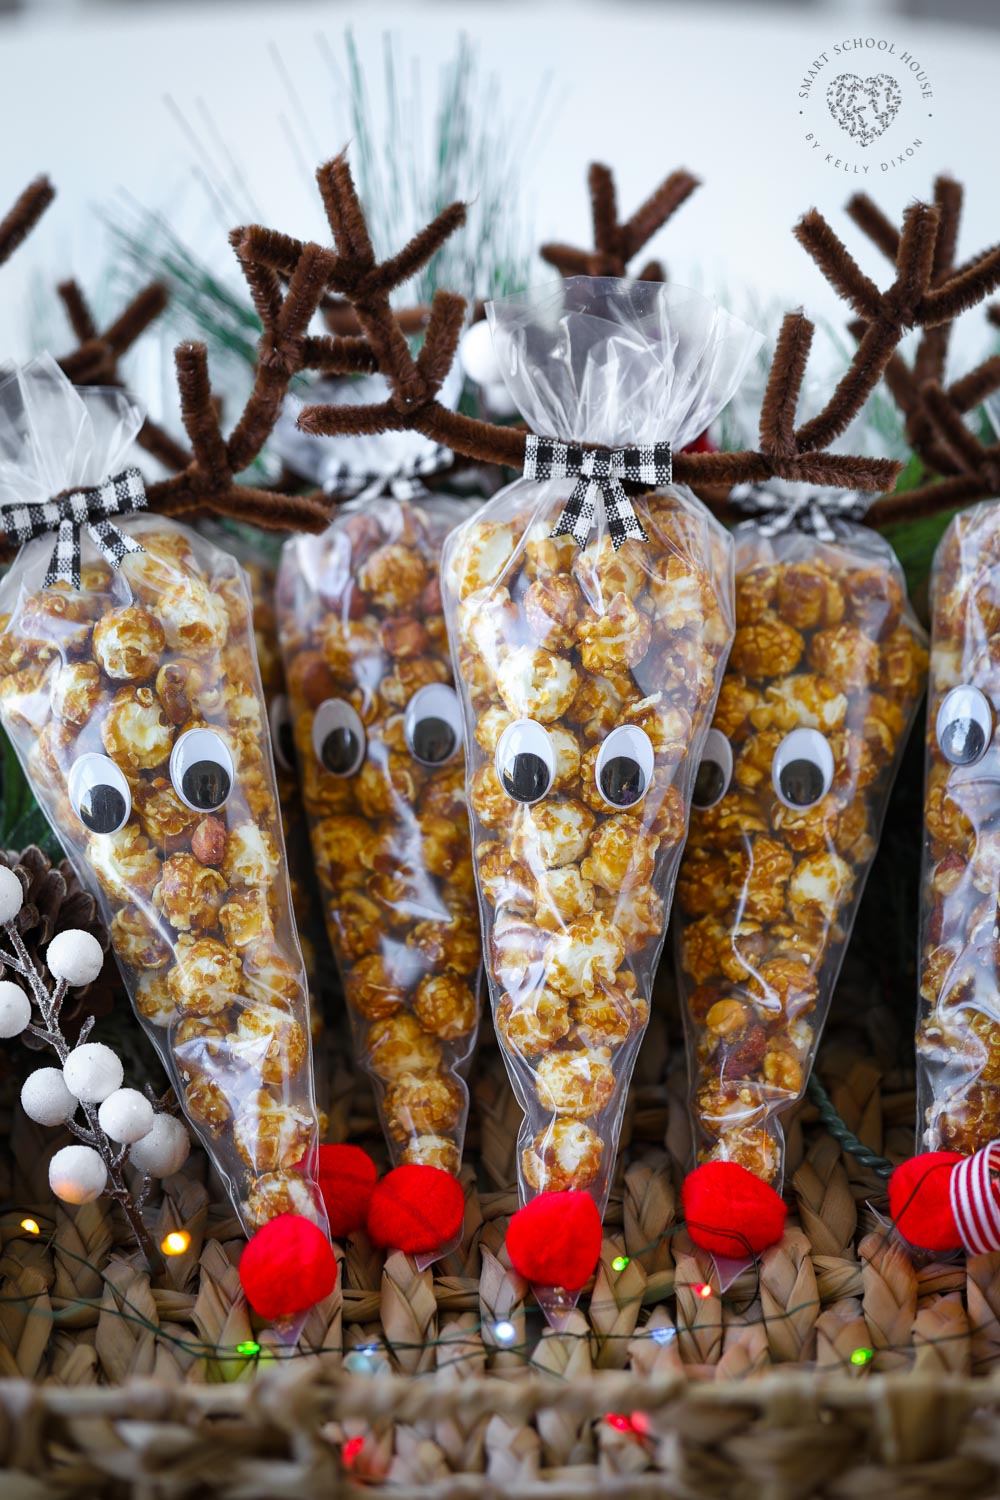 Rudolph is so cute as a Cracker Jack Reindeer! Cone-shaped treat bags filled with caramel corn and topped with pipe cleaner antlers. This is such a cute holiday craft and Christmas gift idea.